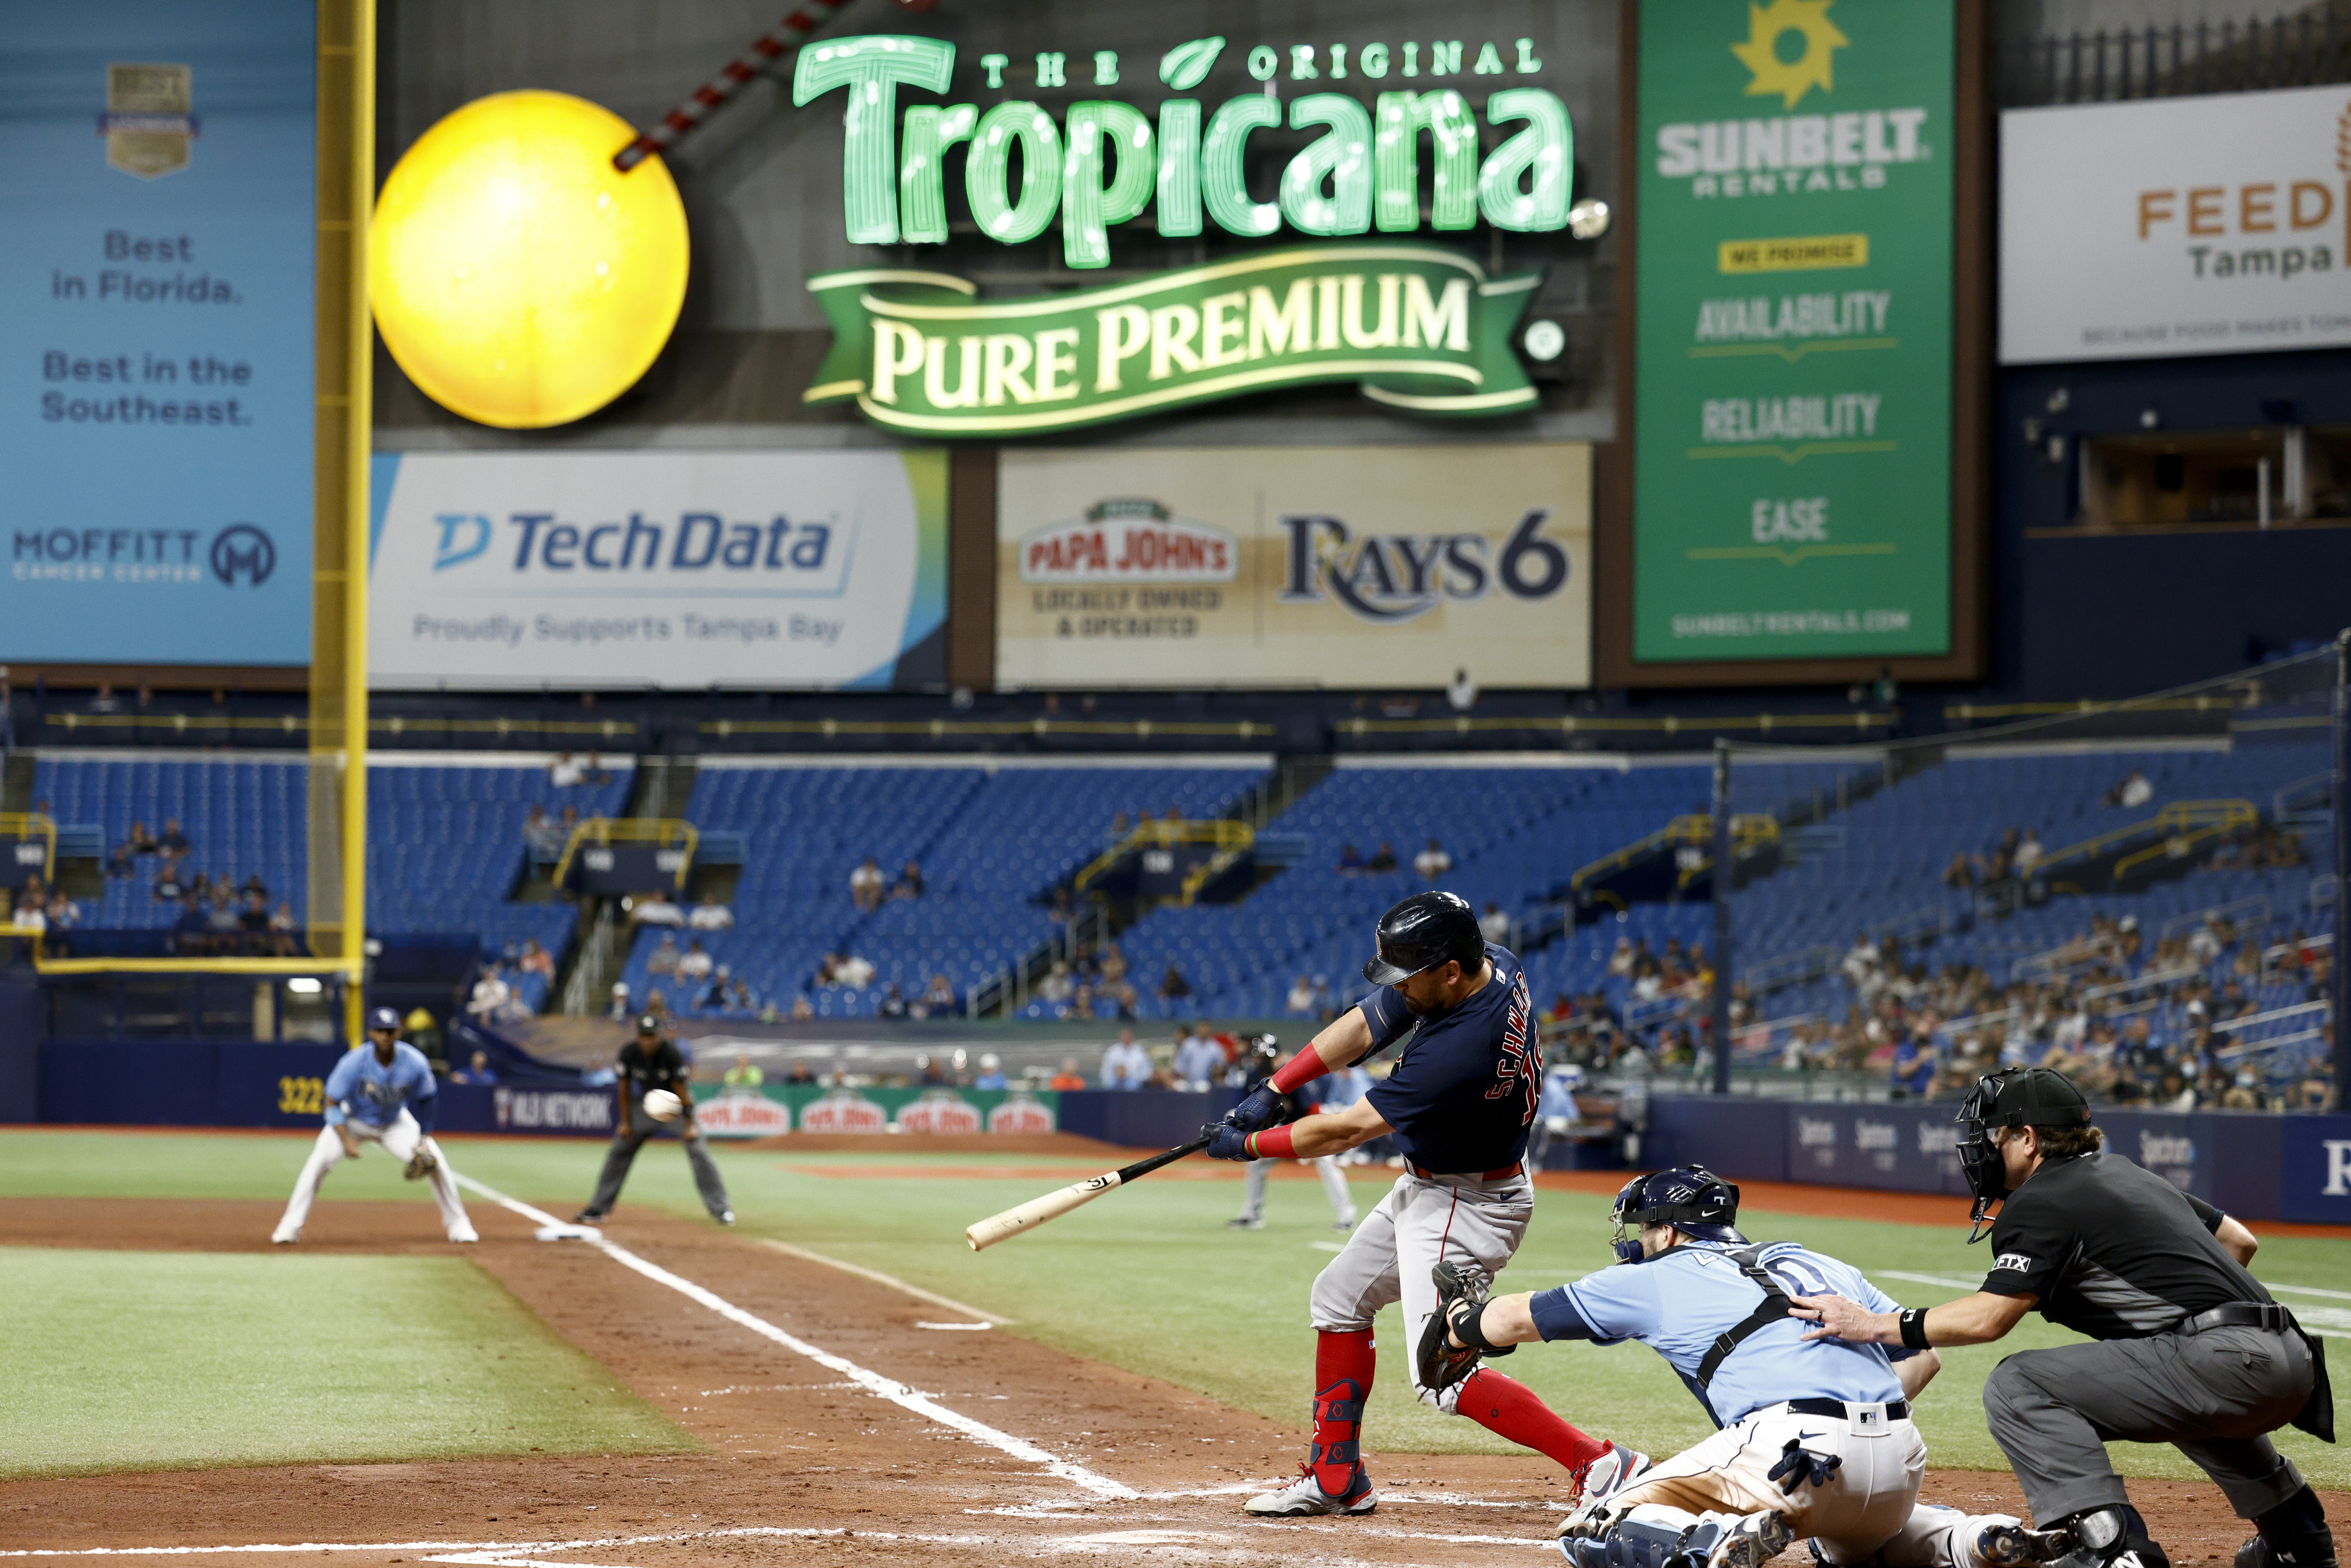 FULL HOUSE! Tampa Bay Rays Fans Pack the Trop